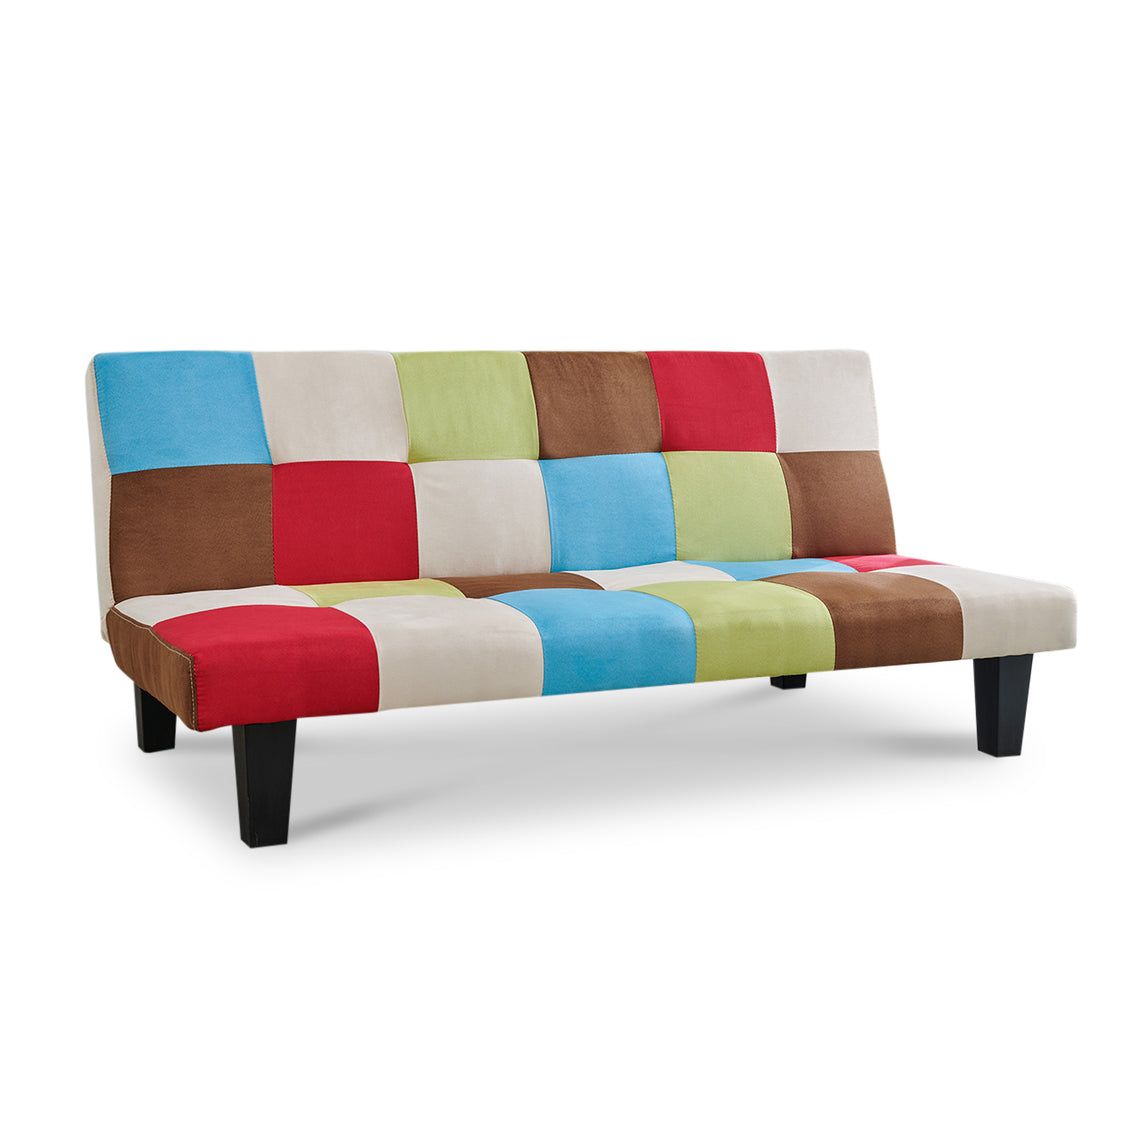 Rainbow Multi Coloured Sofa Retro Style – 3 Seater – Homedetail.co (View 16 of 20)